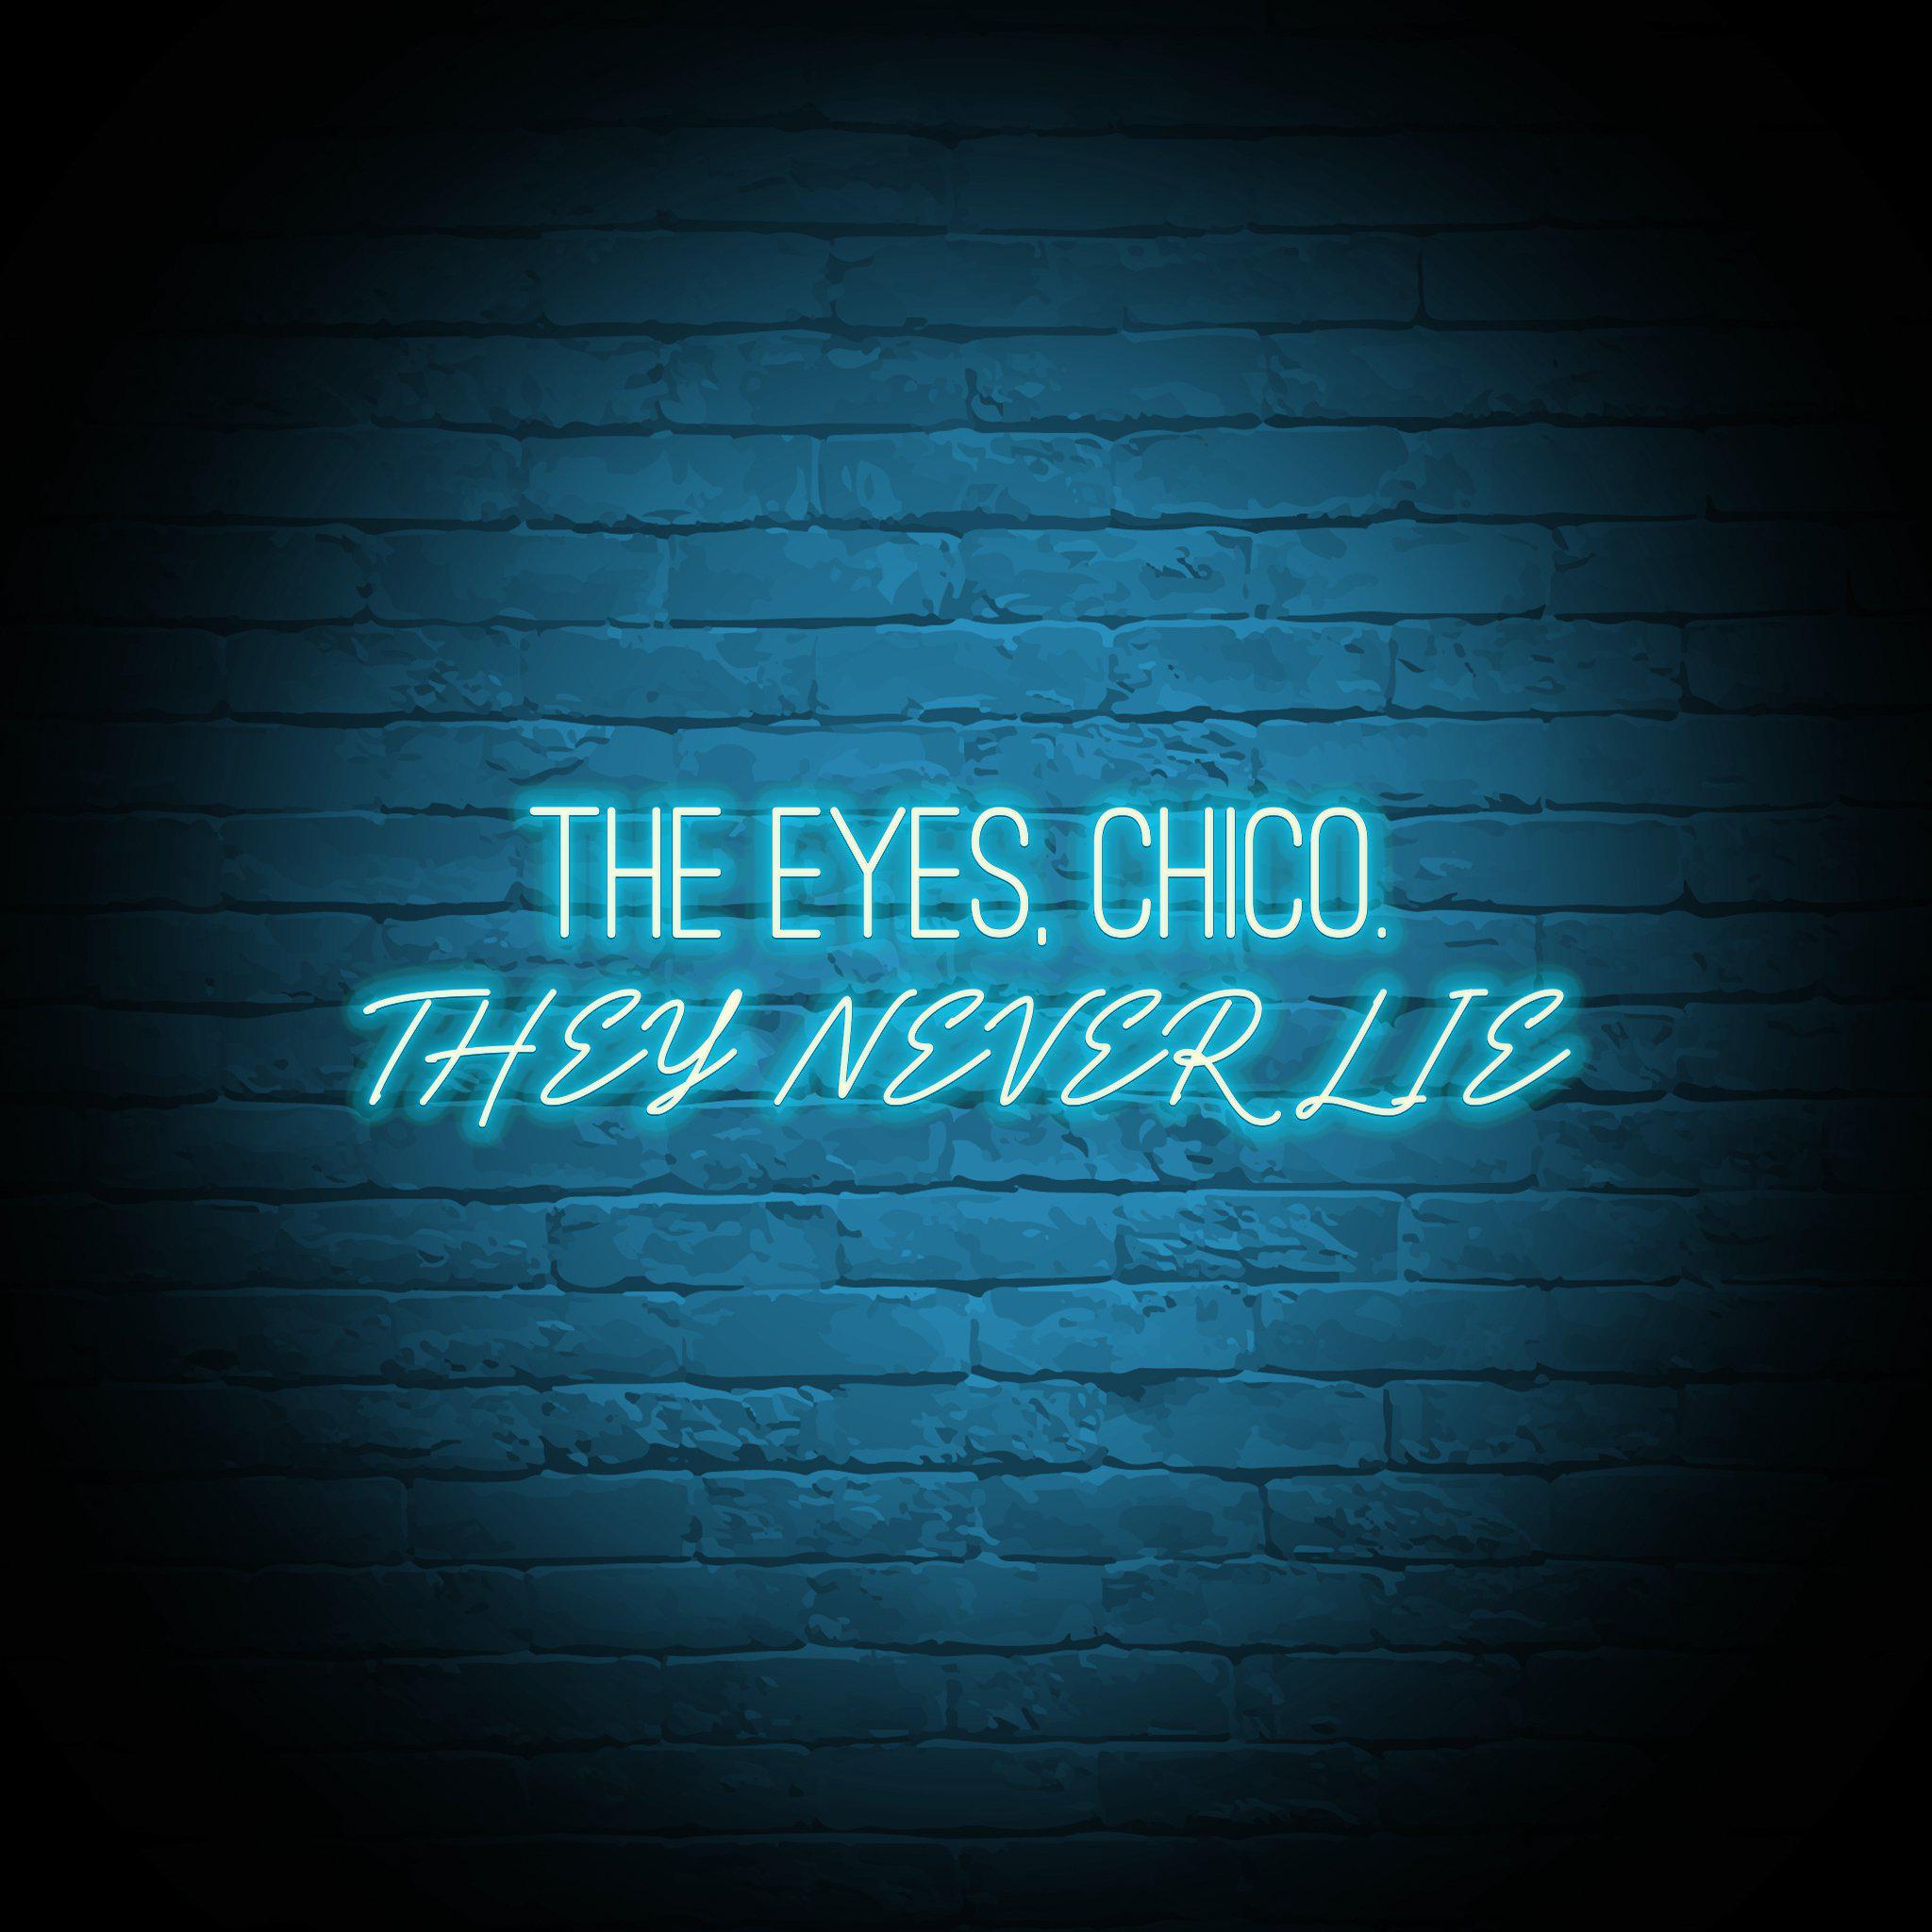 'THE EYES CHICO, THEY NEVER LIE' NEON SIGN